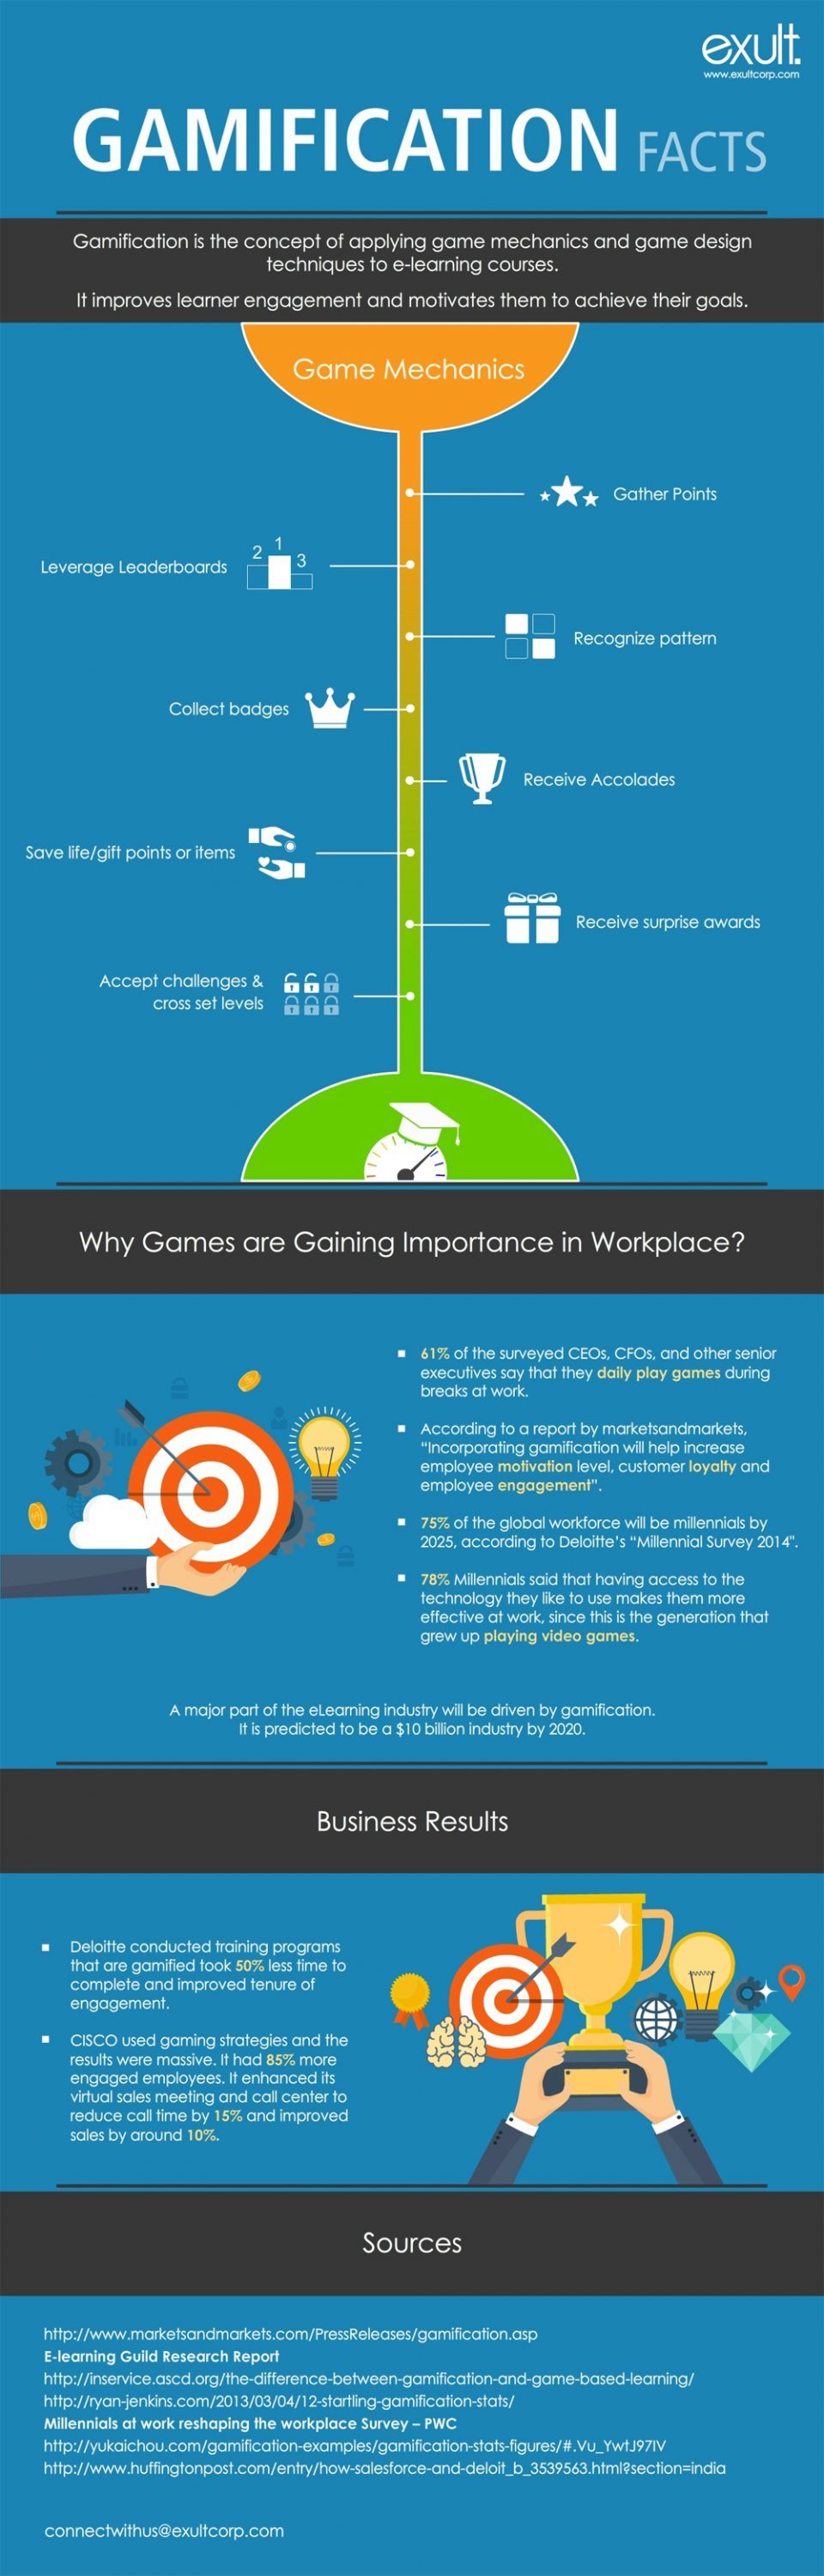 Gamification Facts Infographic